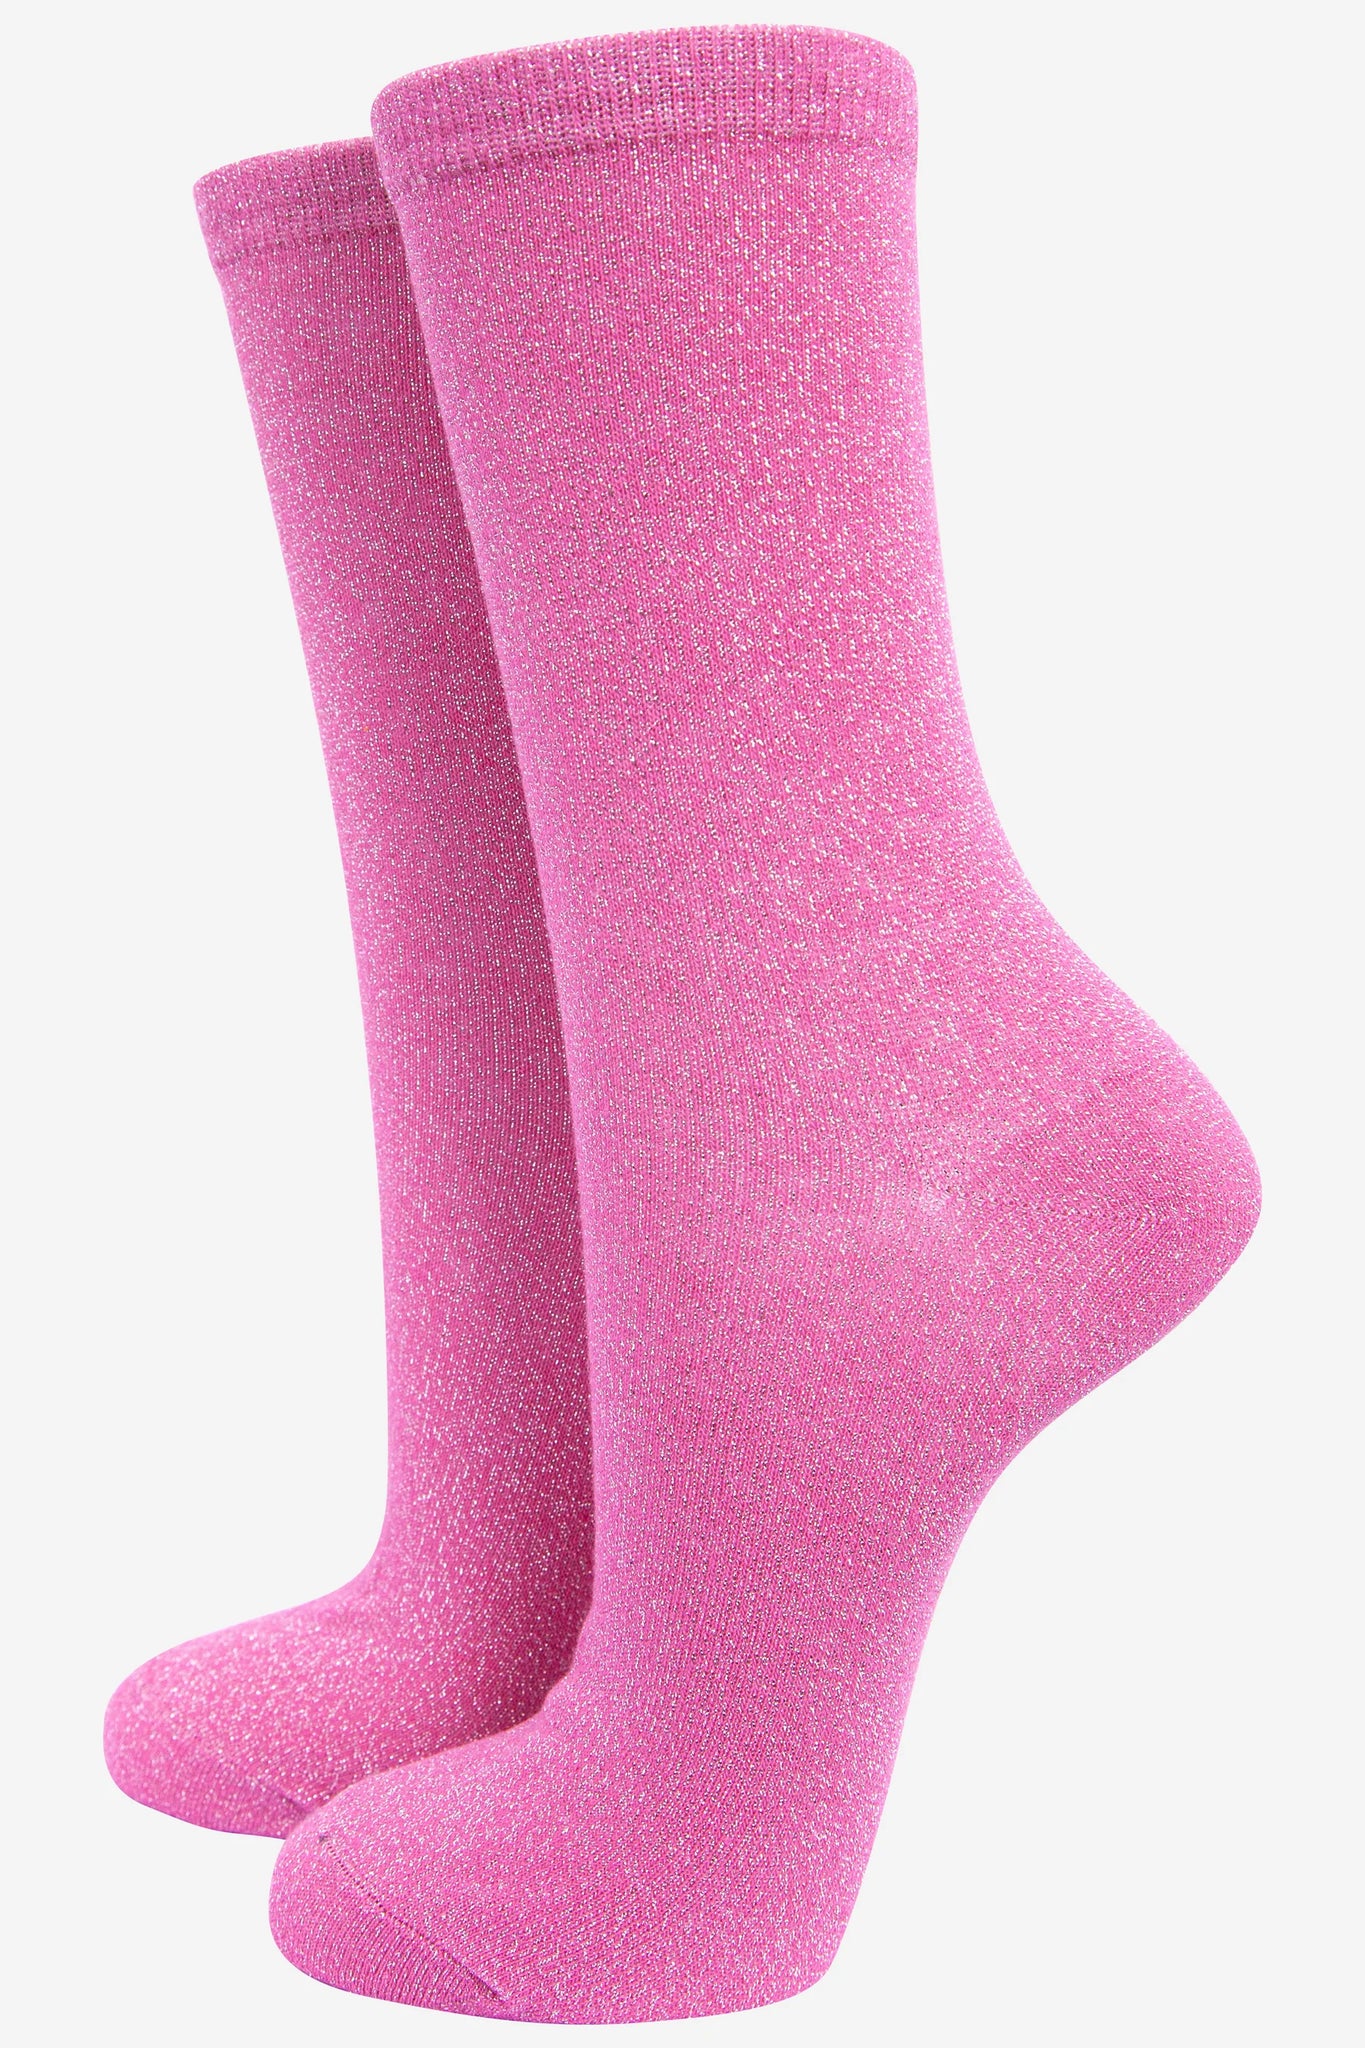 Women's Cotton All Over Glitter Ankle Socks in Hot Pink